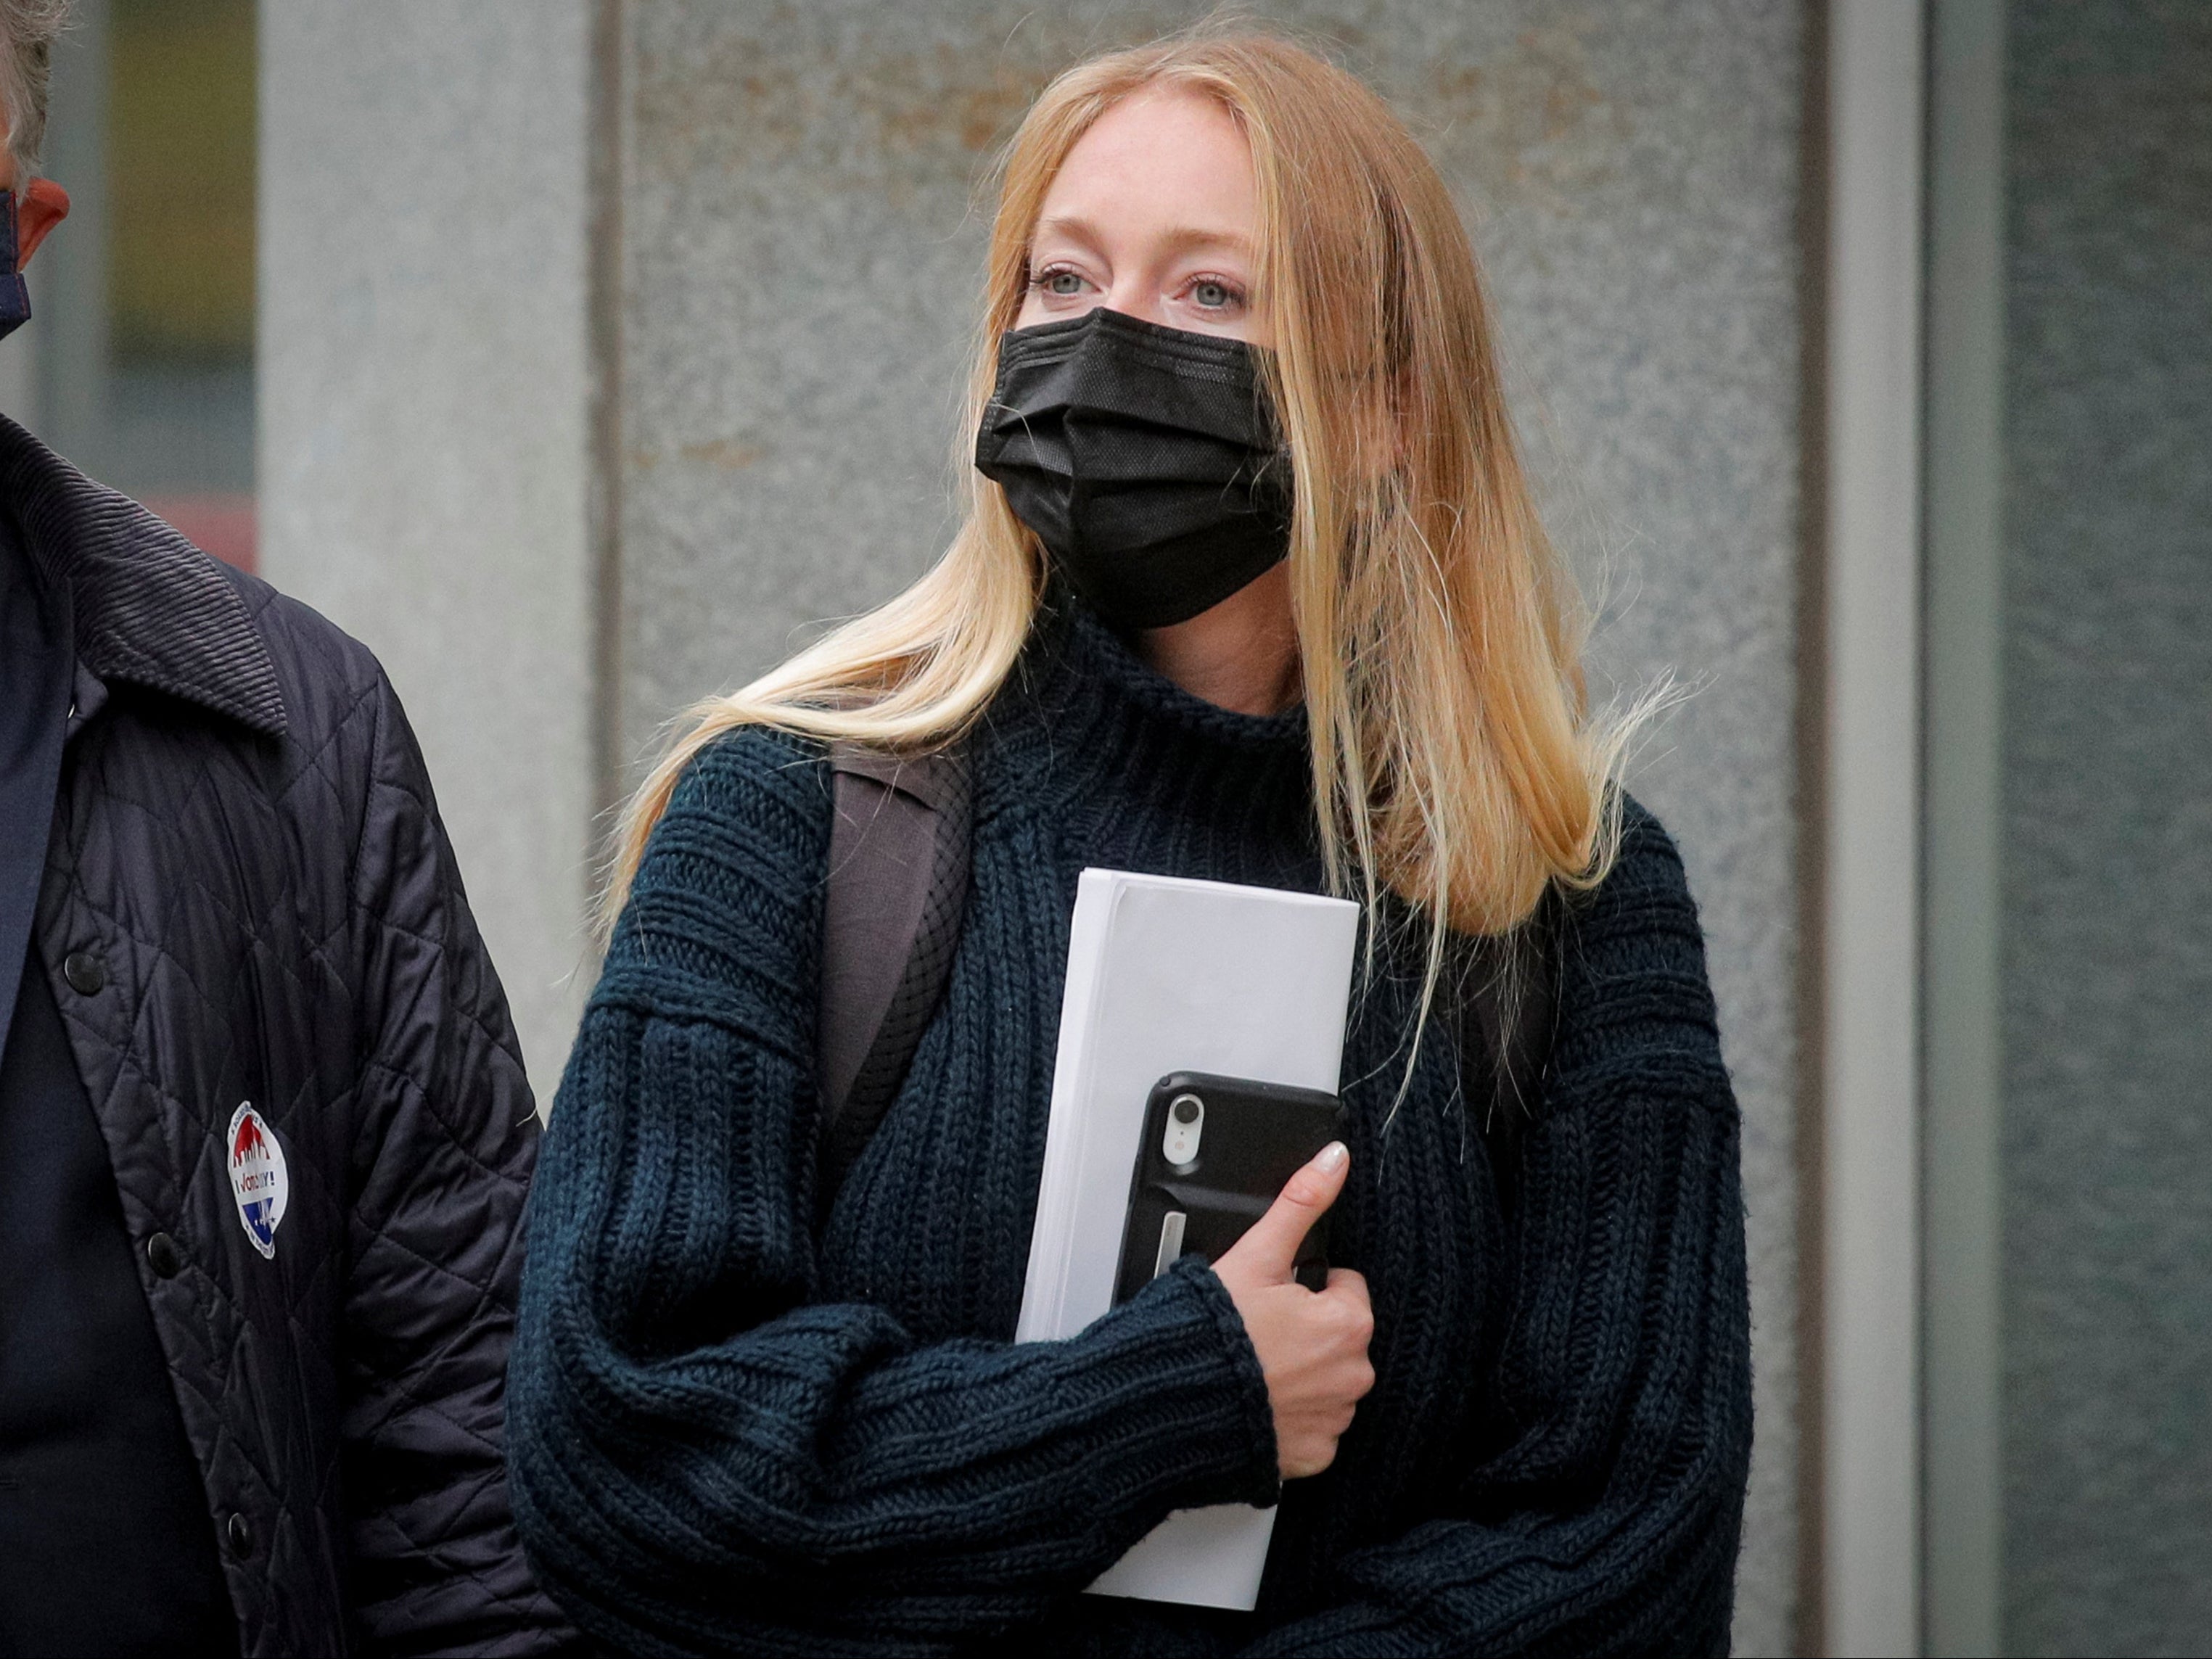 India Oxenberg arrives for Keith Raniere’s sentencing hearing in Brooklyn, New York, on 27 October 2020